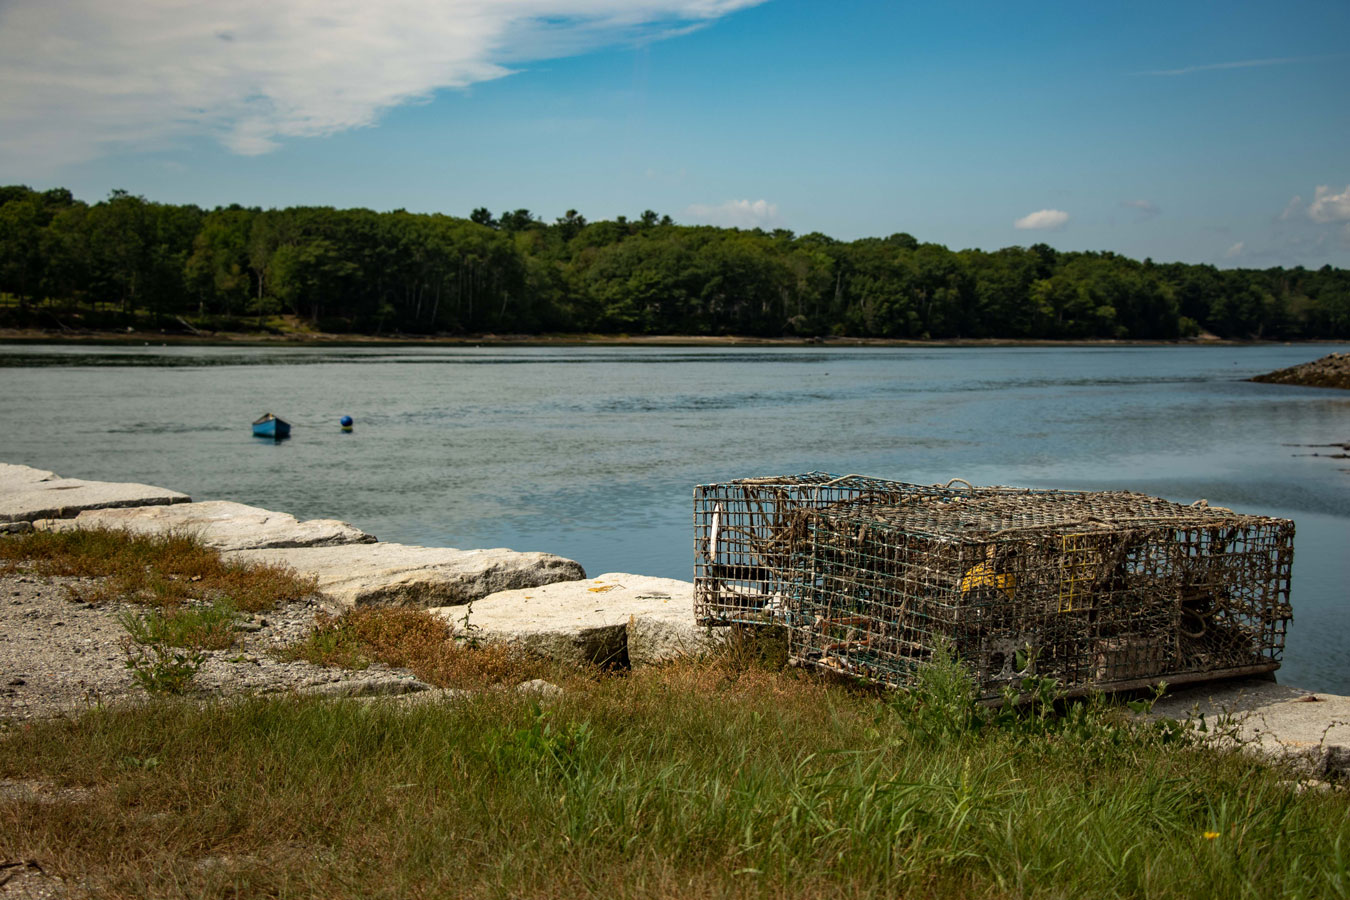 Photo of Taunton Bay from the shore, with lobster cages on some rocks.